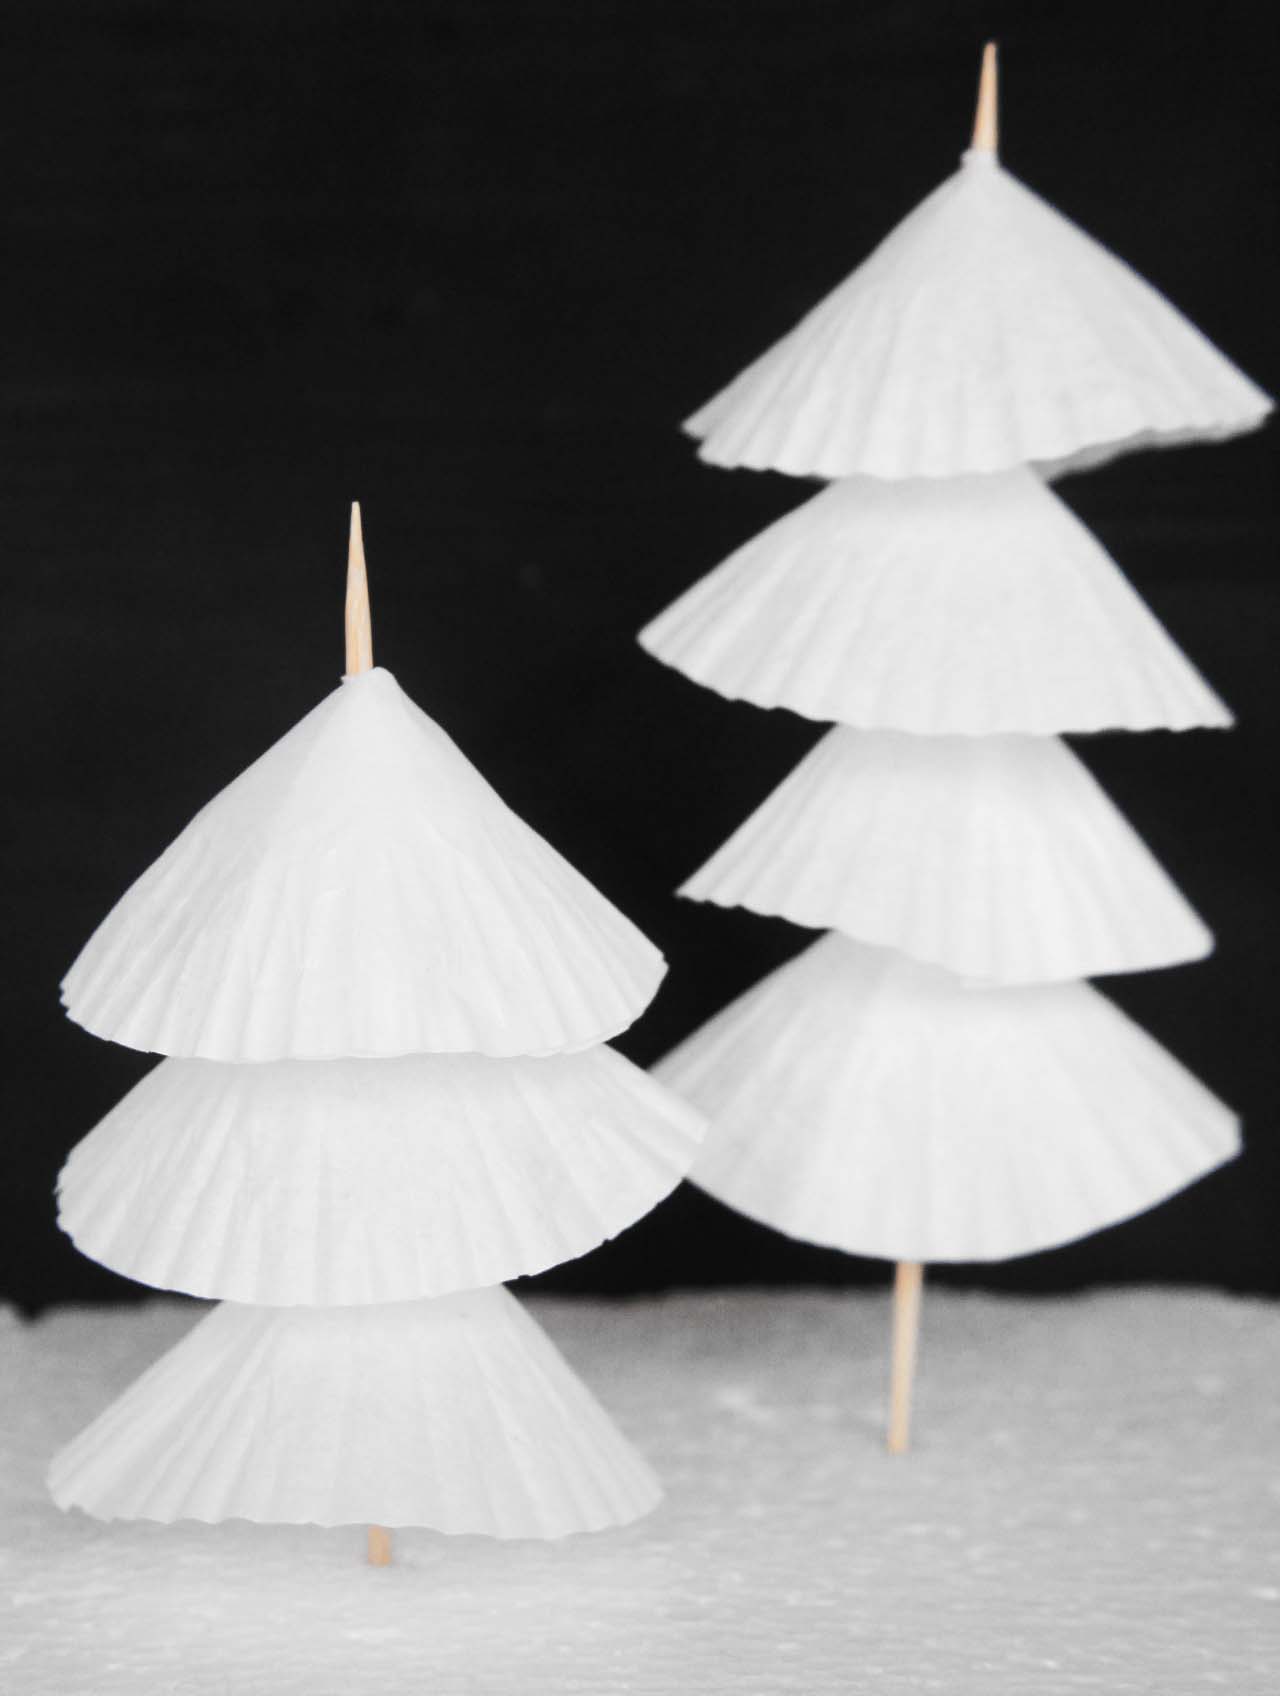 These little Paper Christmas trees are crazy easy & affordable